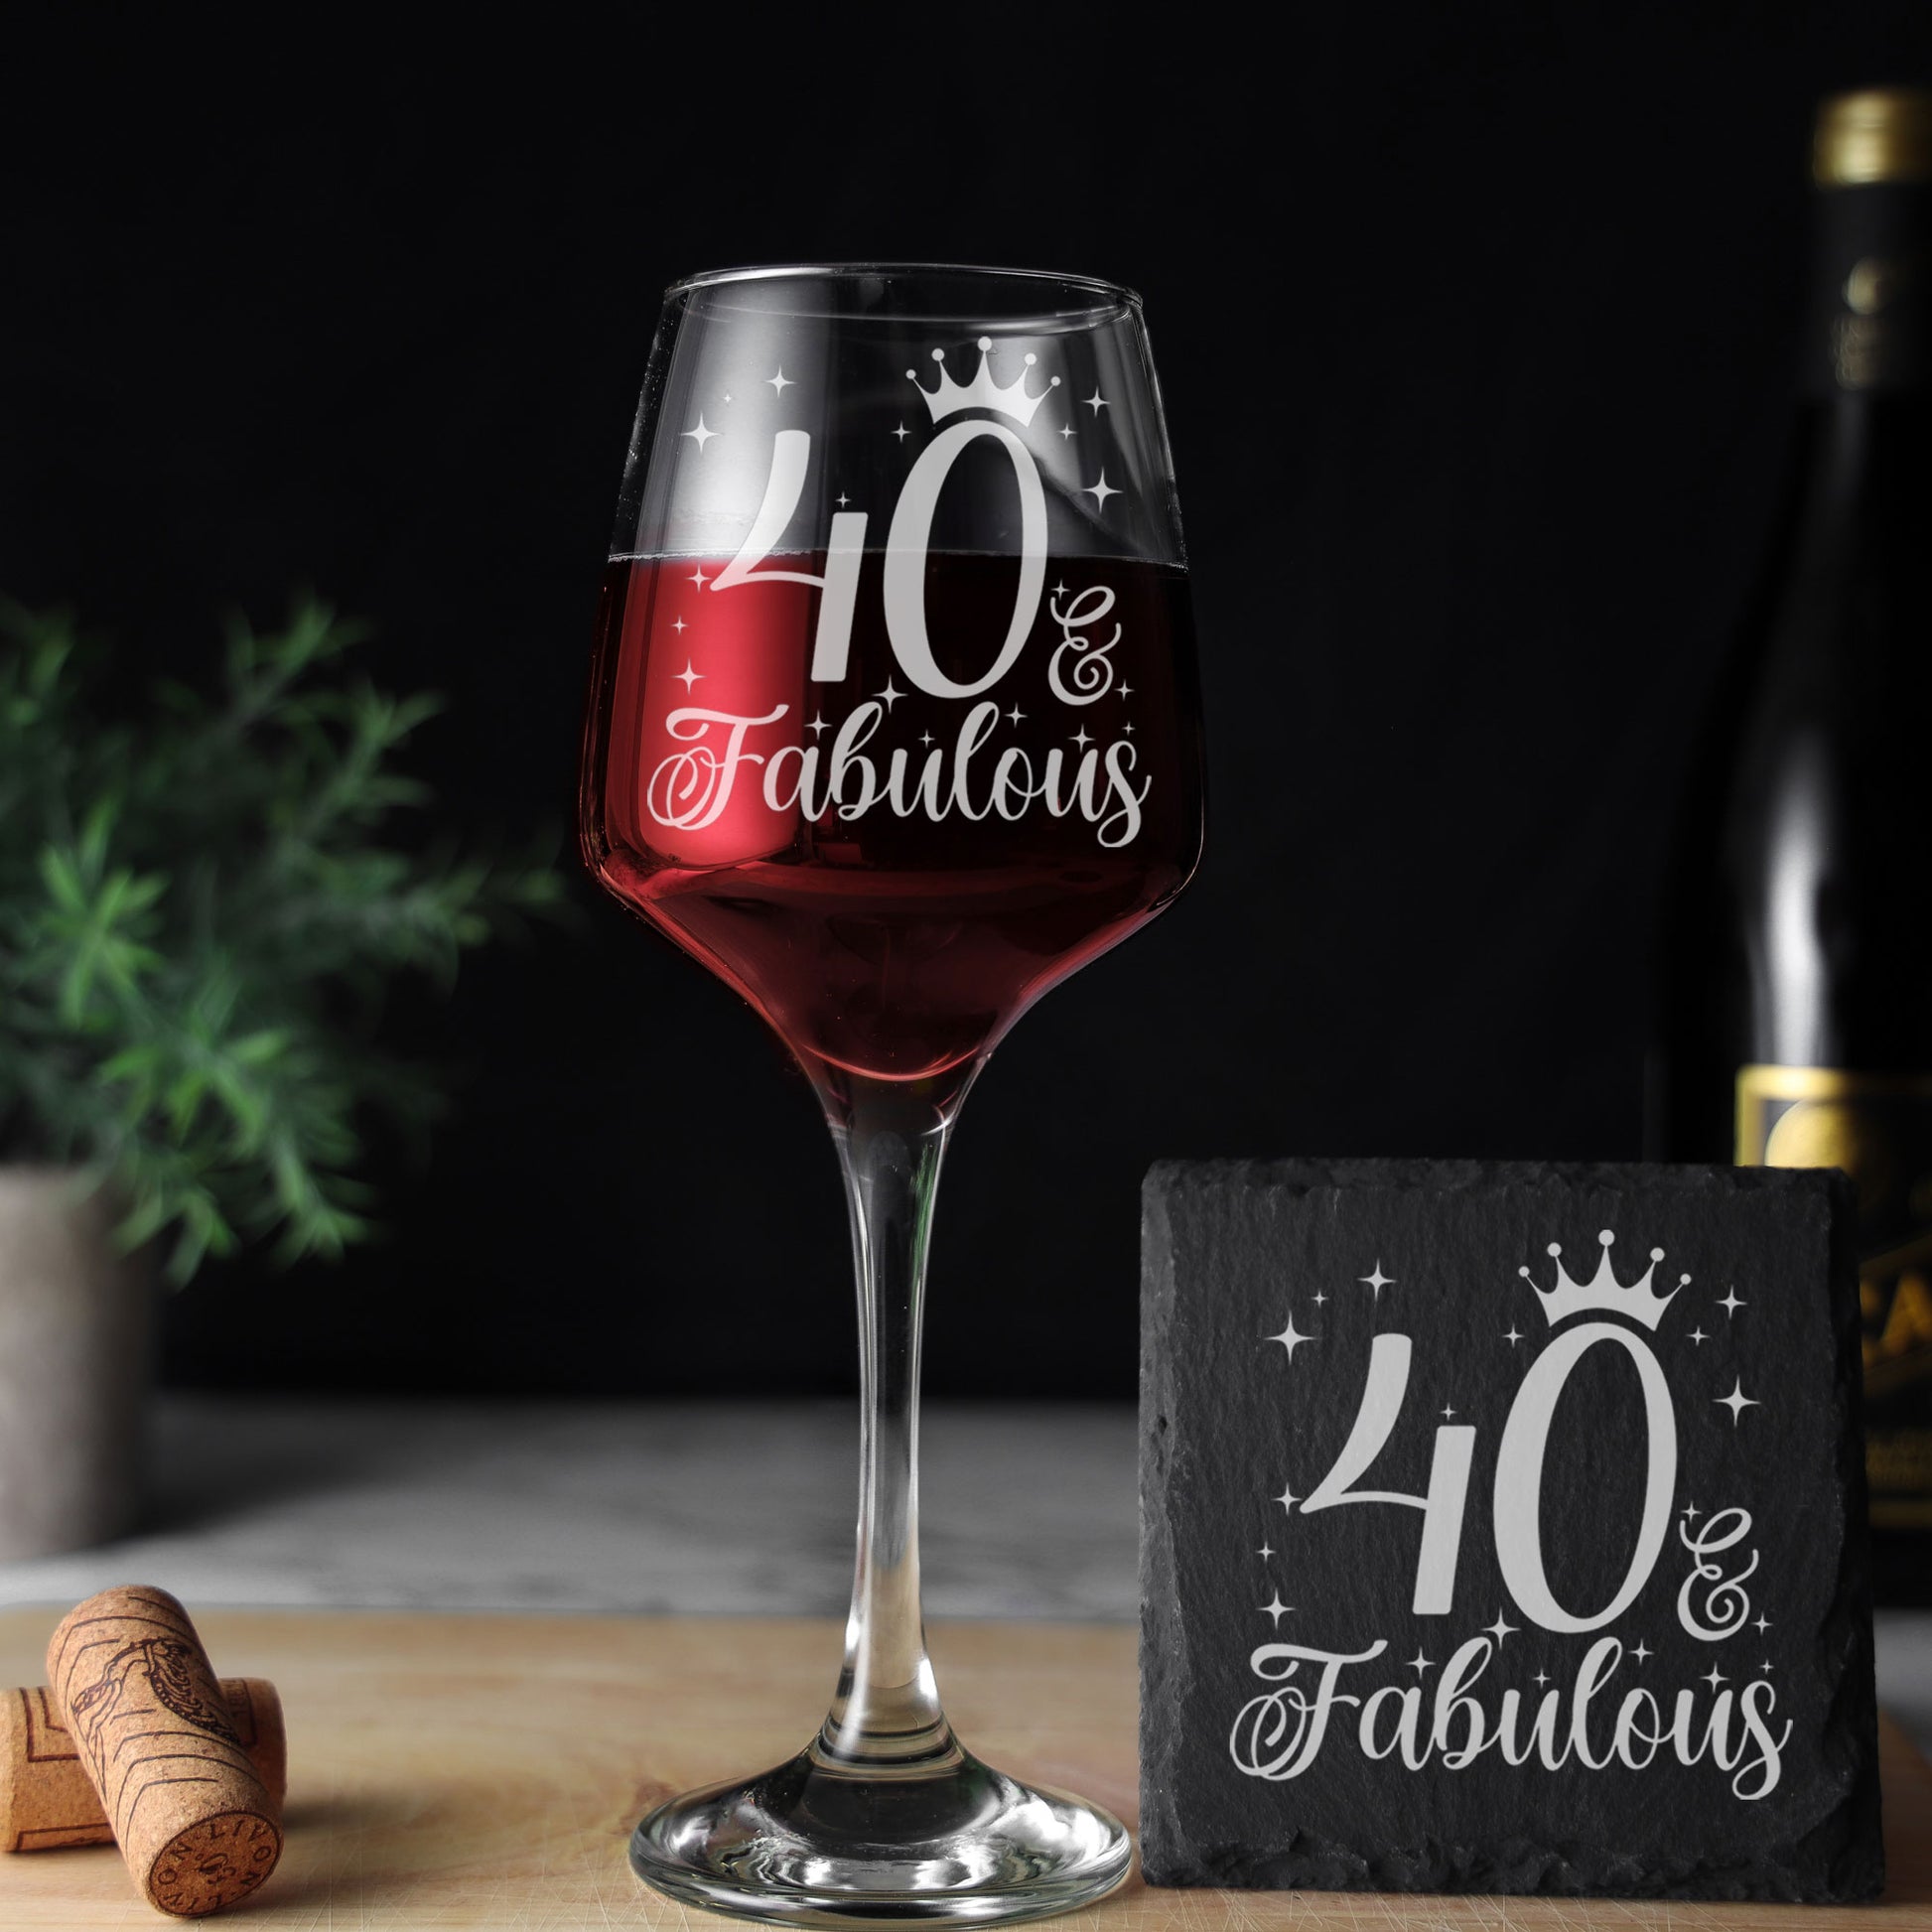 40 & Fabulous 40th Birthday Gift Engraved Wine Glass and/or Coaster Set  - Always Looking Good - Glass & Square Coaster  